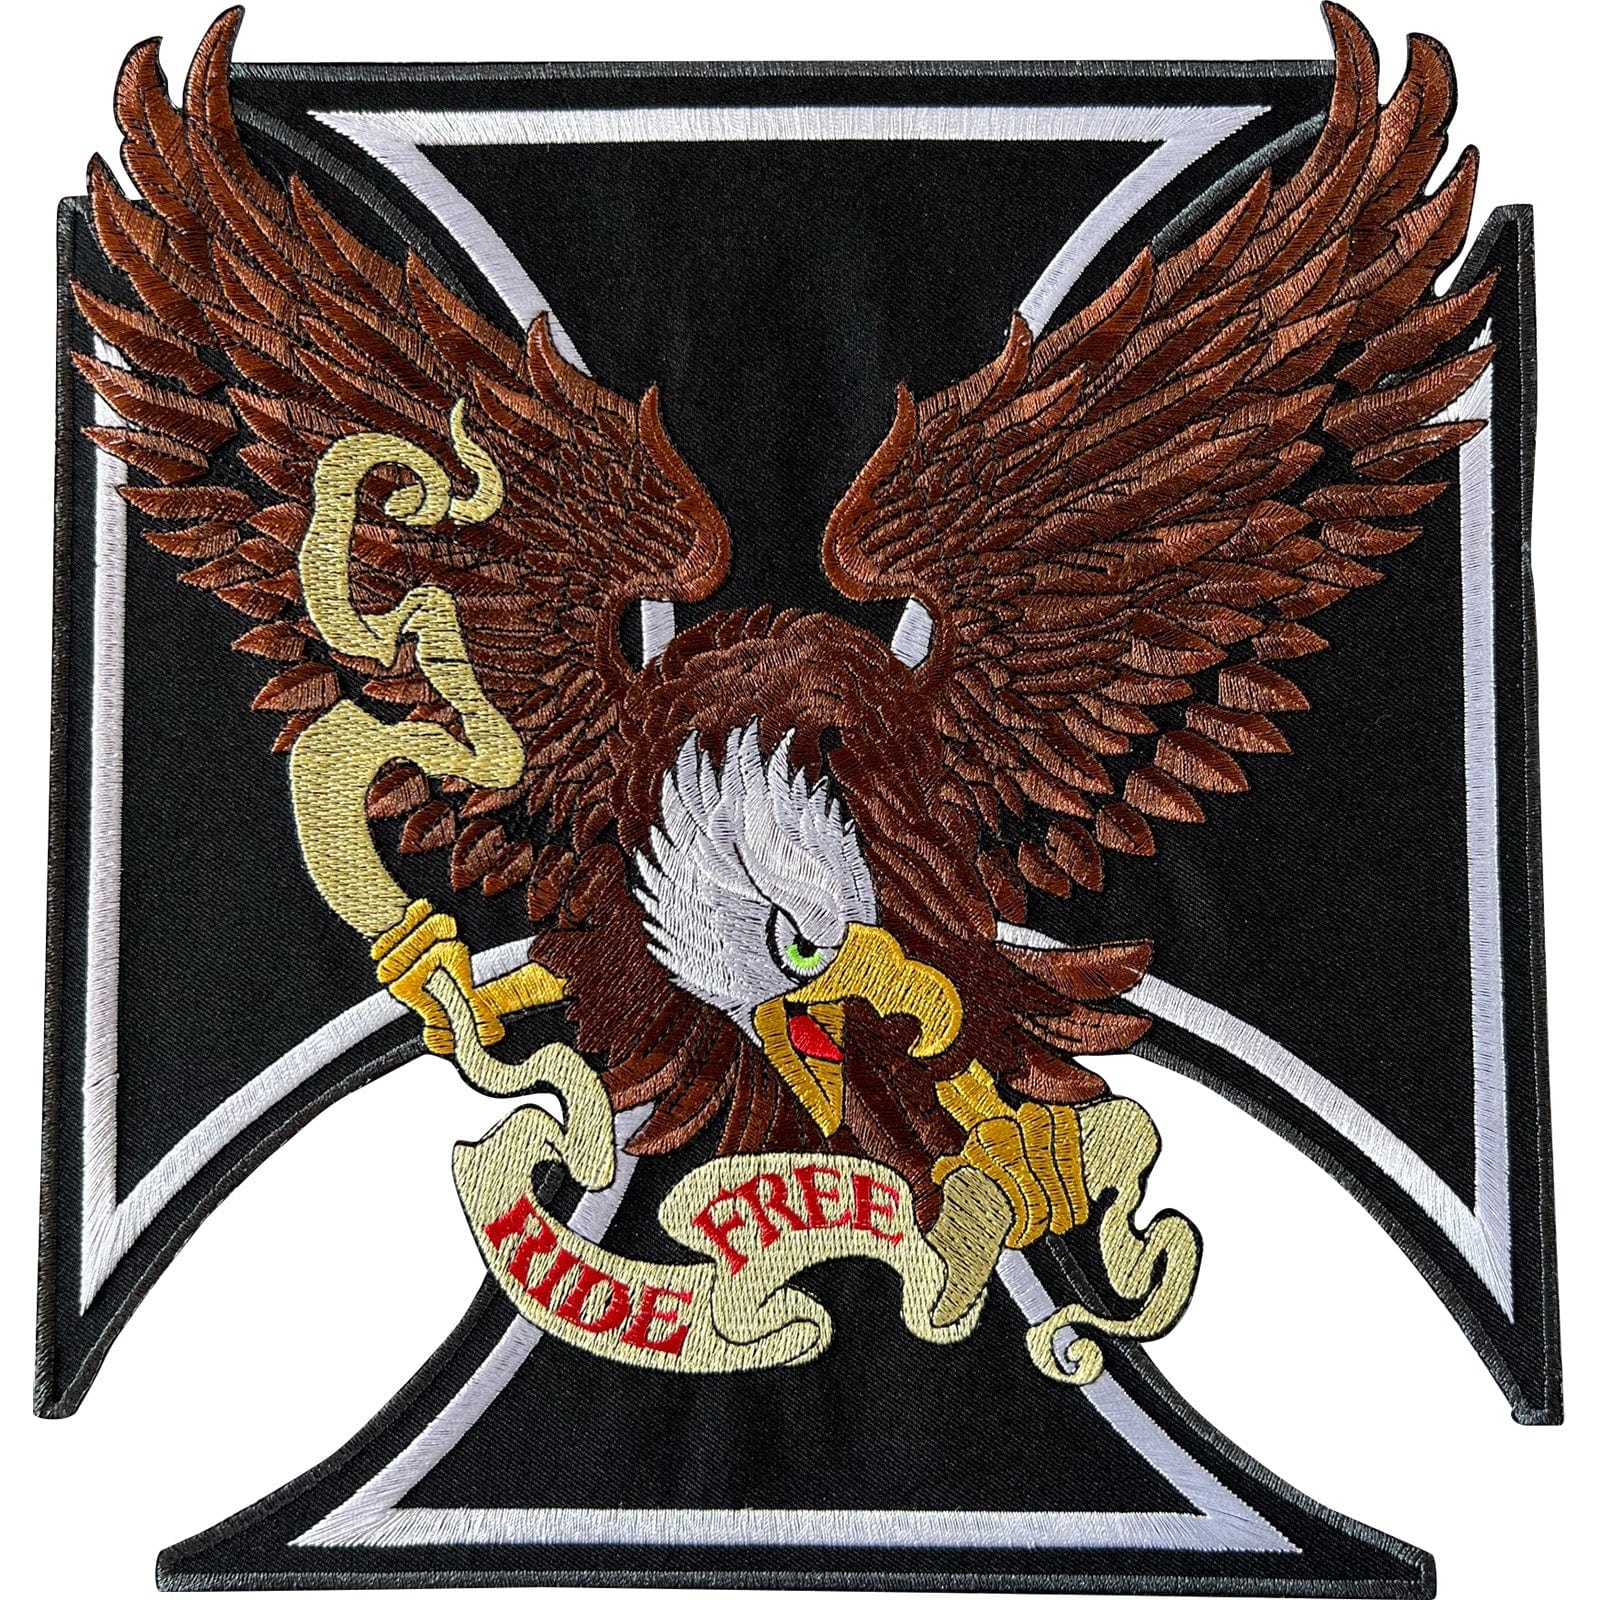 Big Large Ride Free Eagle Cross Patch Iron Sew On Clothing Bag Embroidered Badge